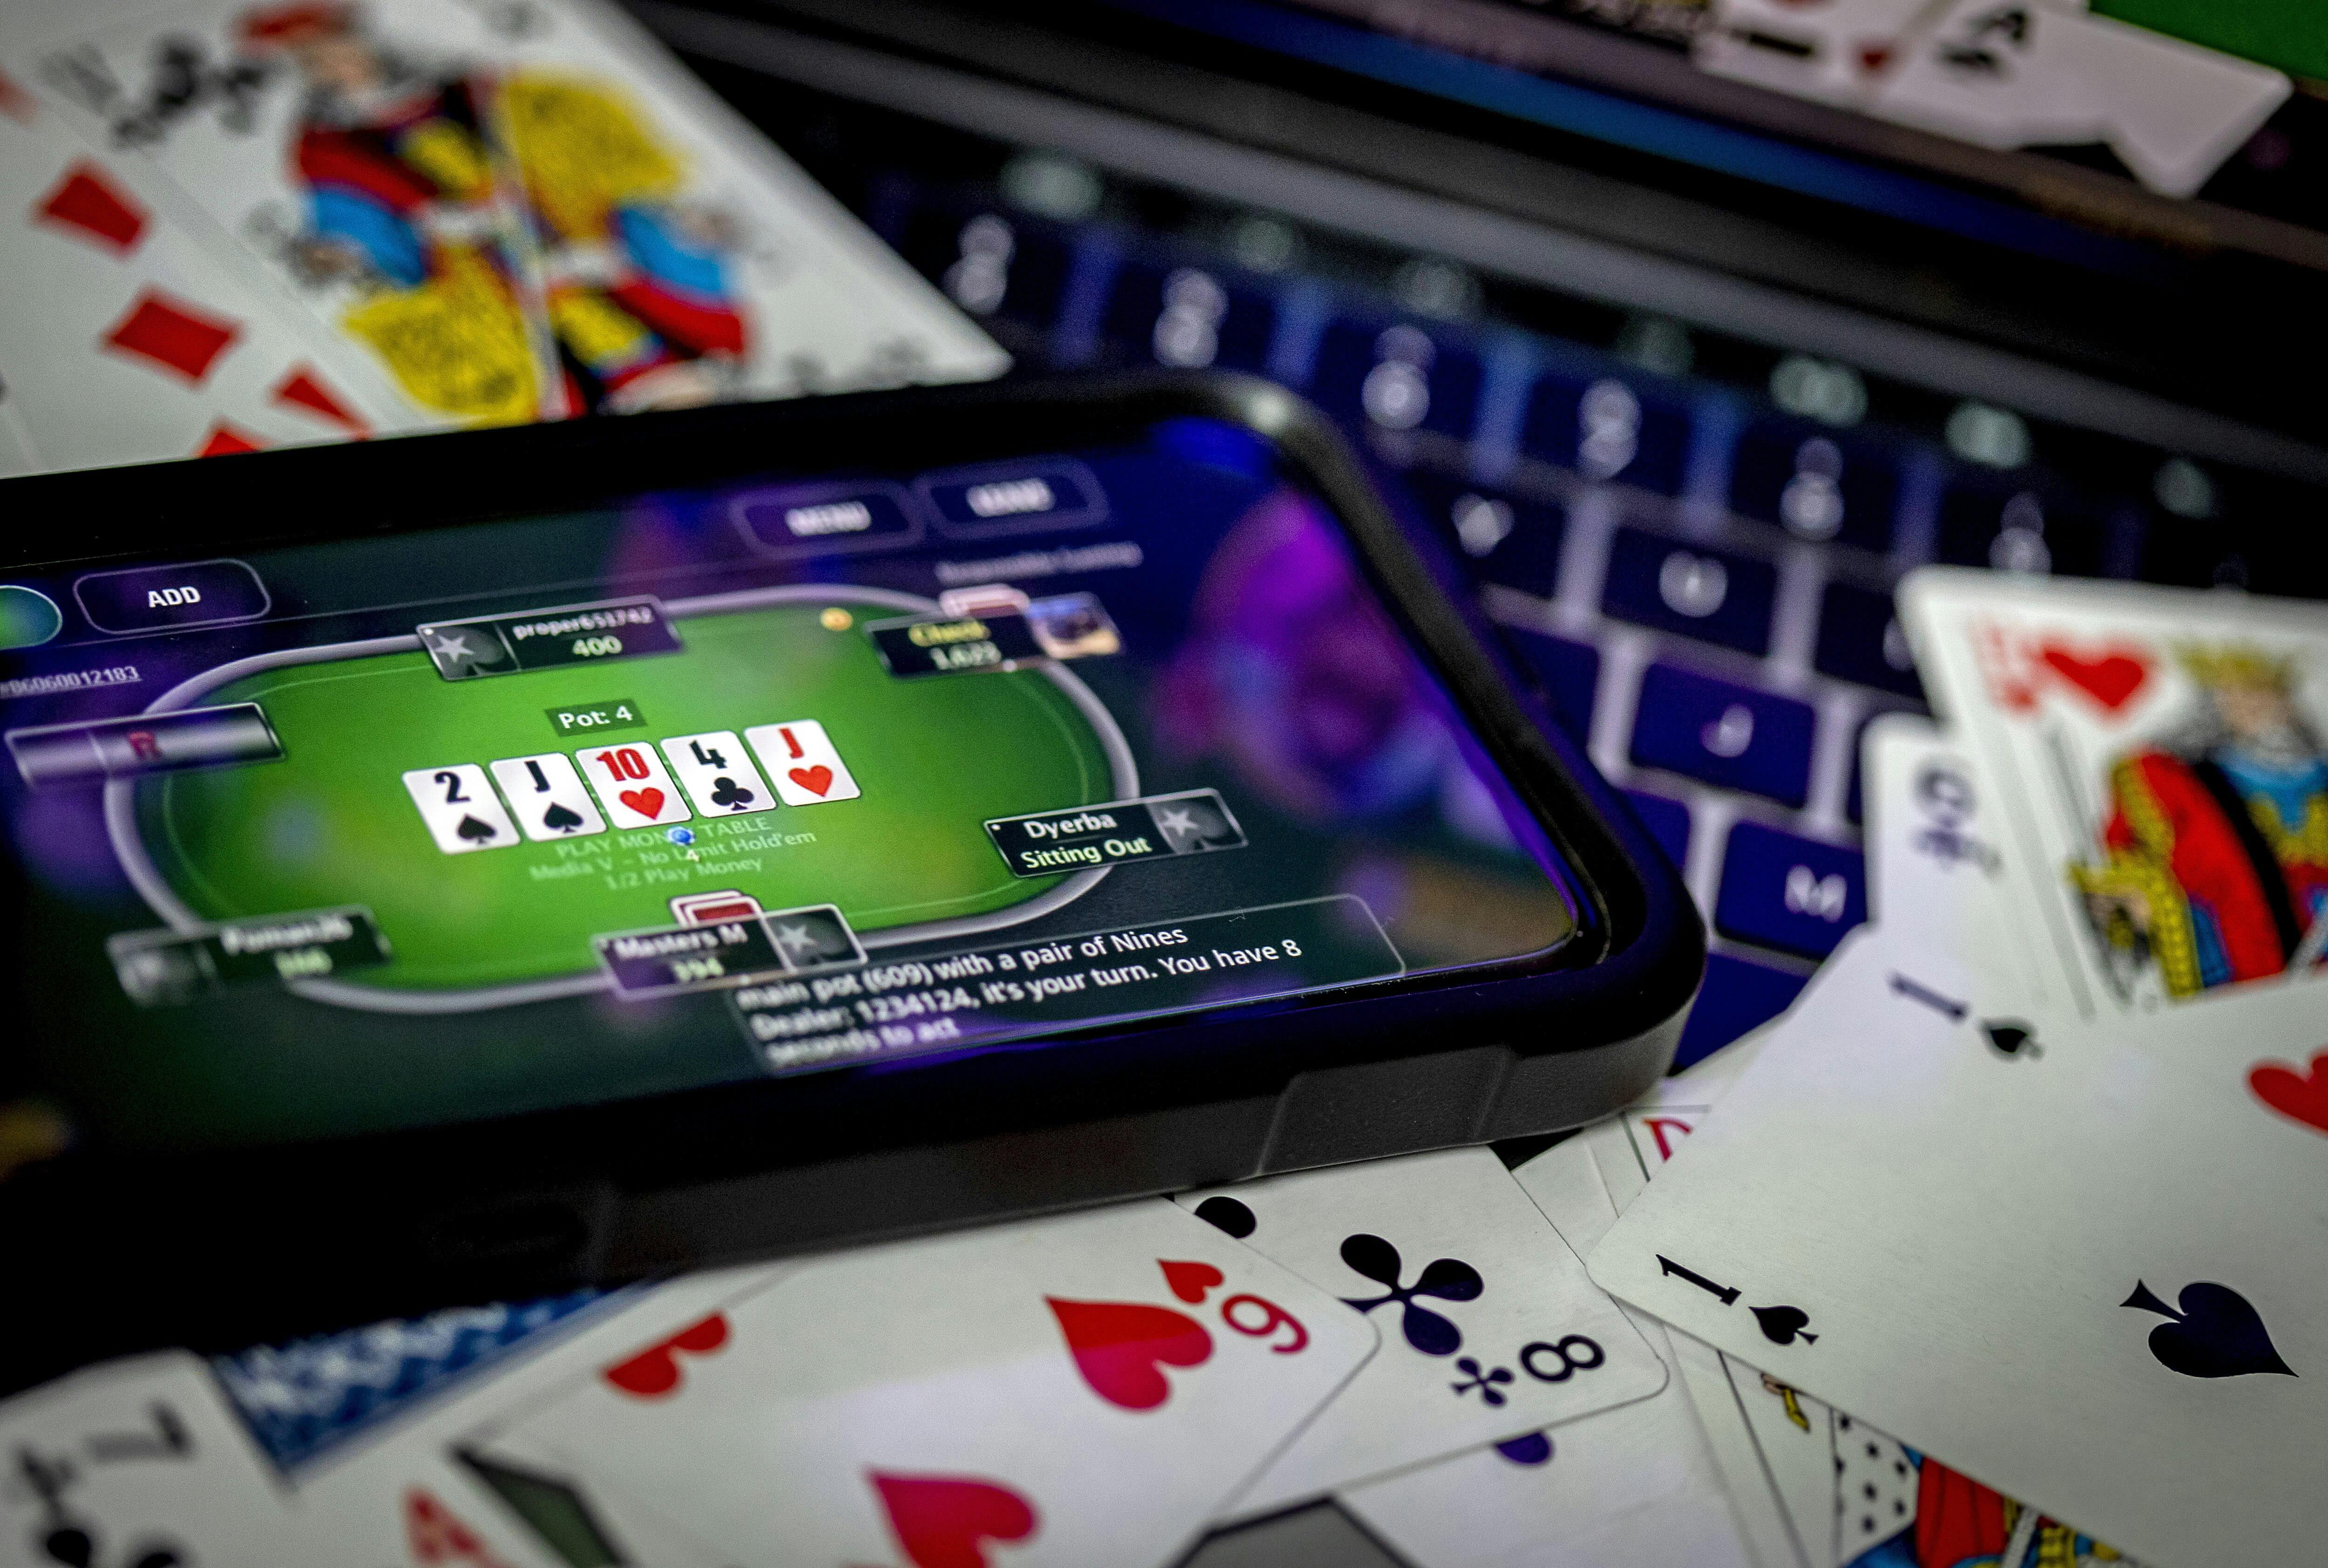 Poker being played on smartphone